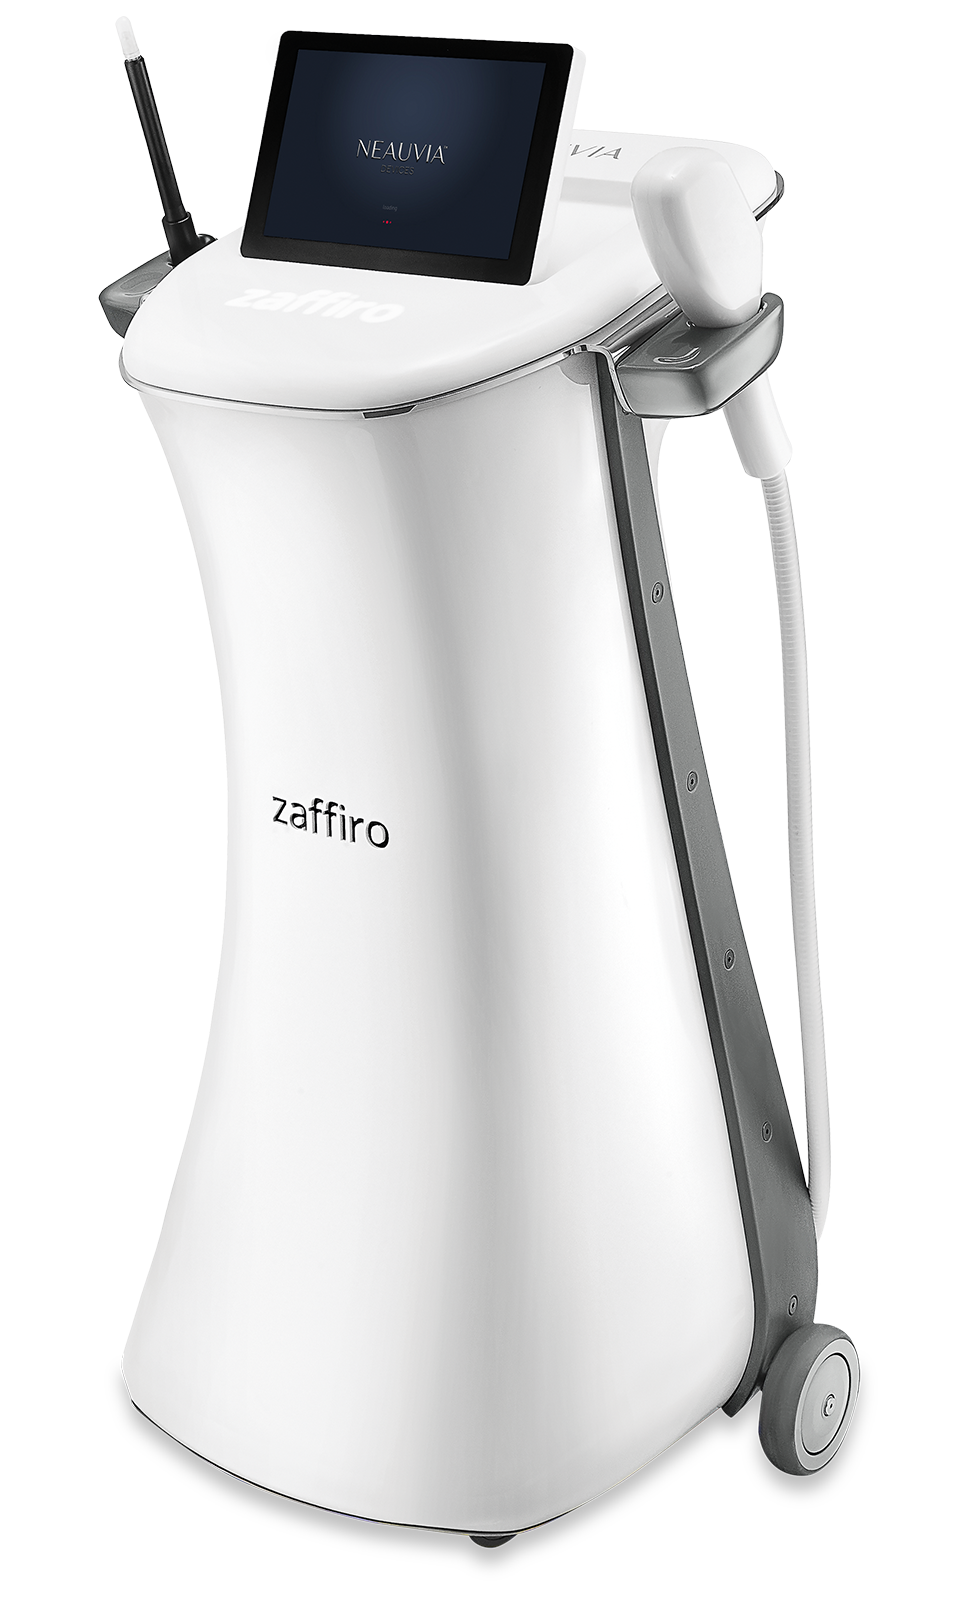 ZAFFIRO is an innovative medical device that combines hydro-exfoliation and infrared thermo-lifting to brighten and tighten the skin